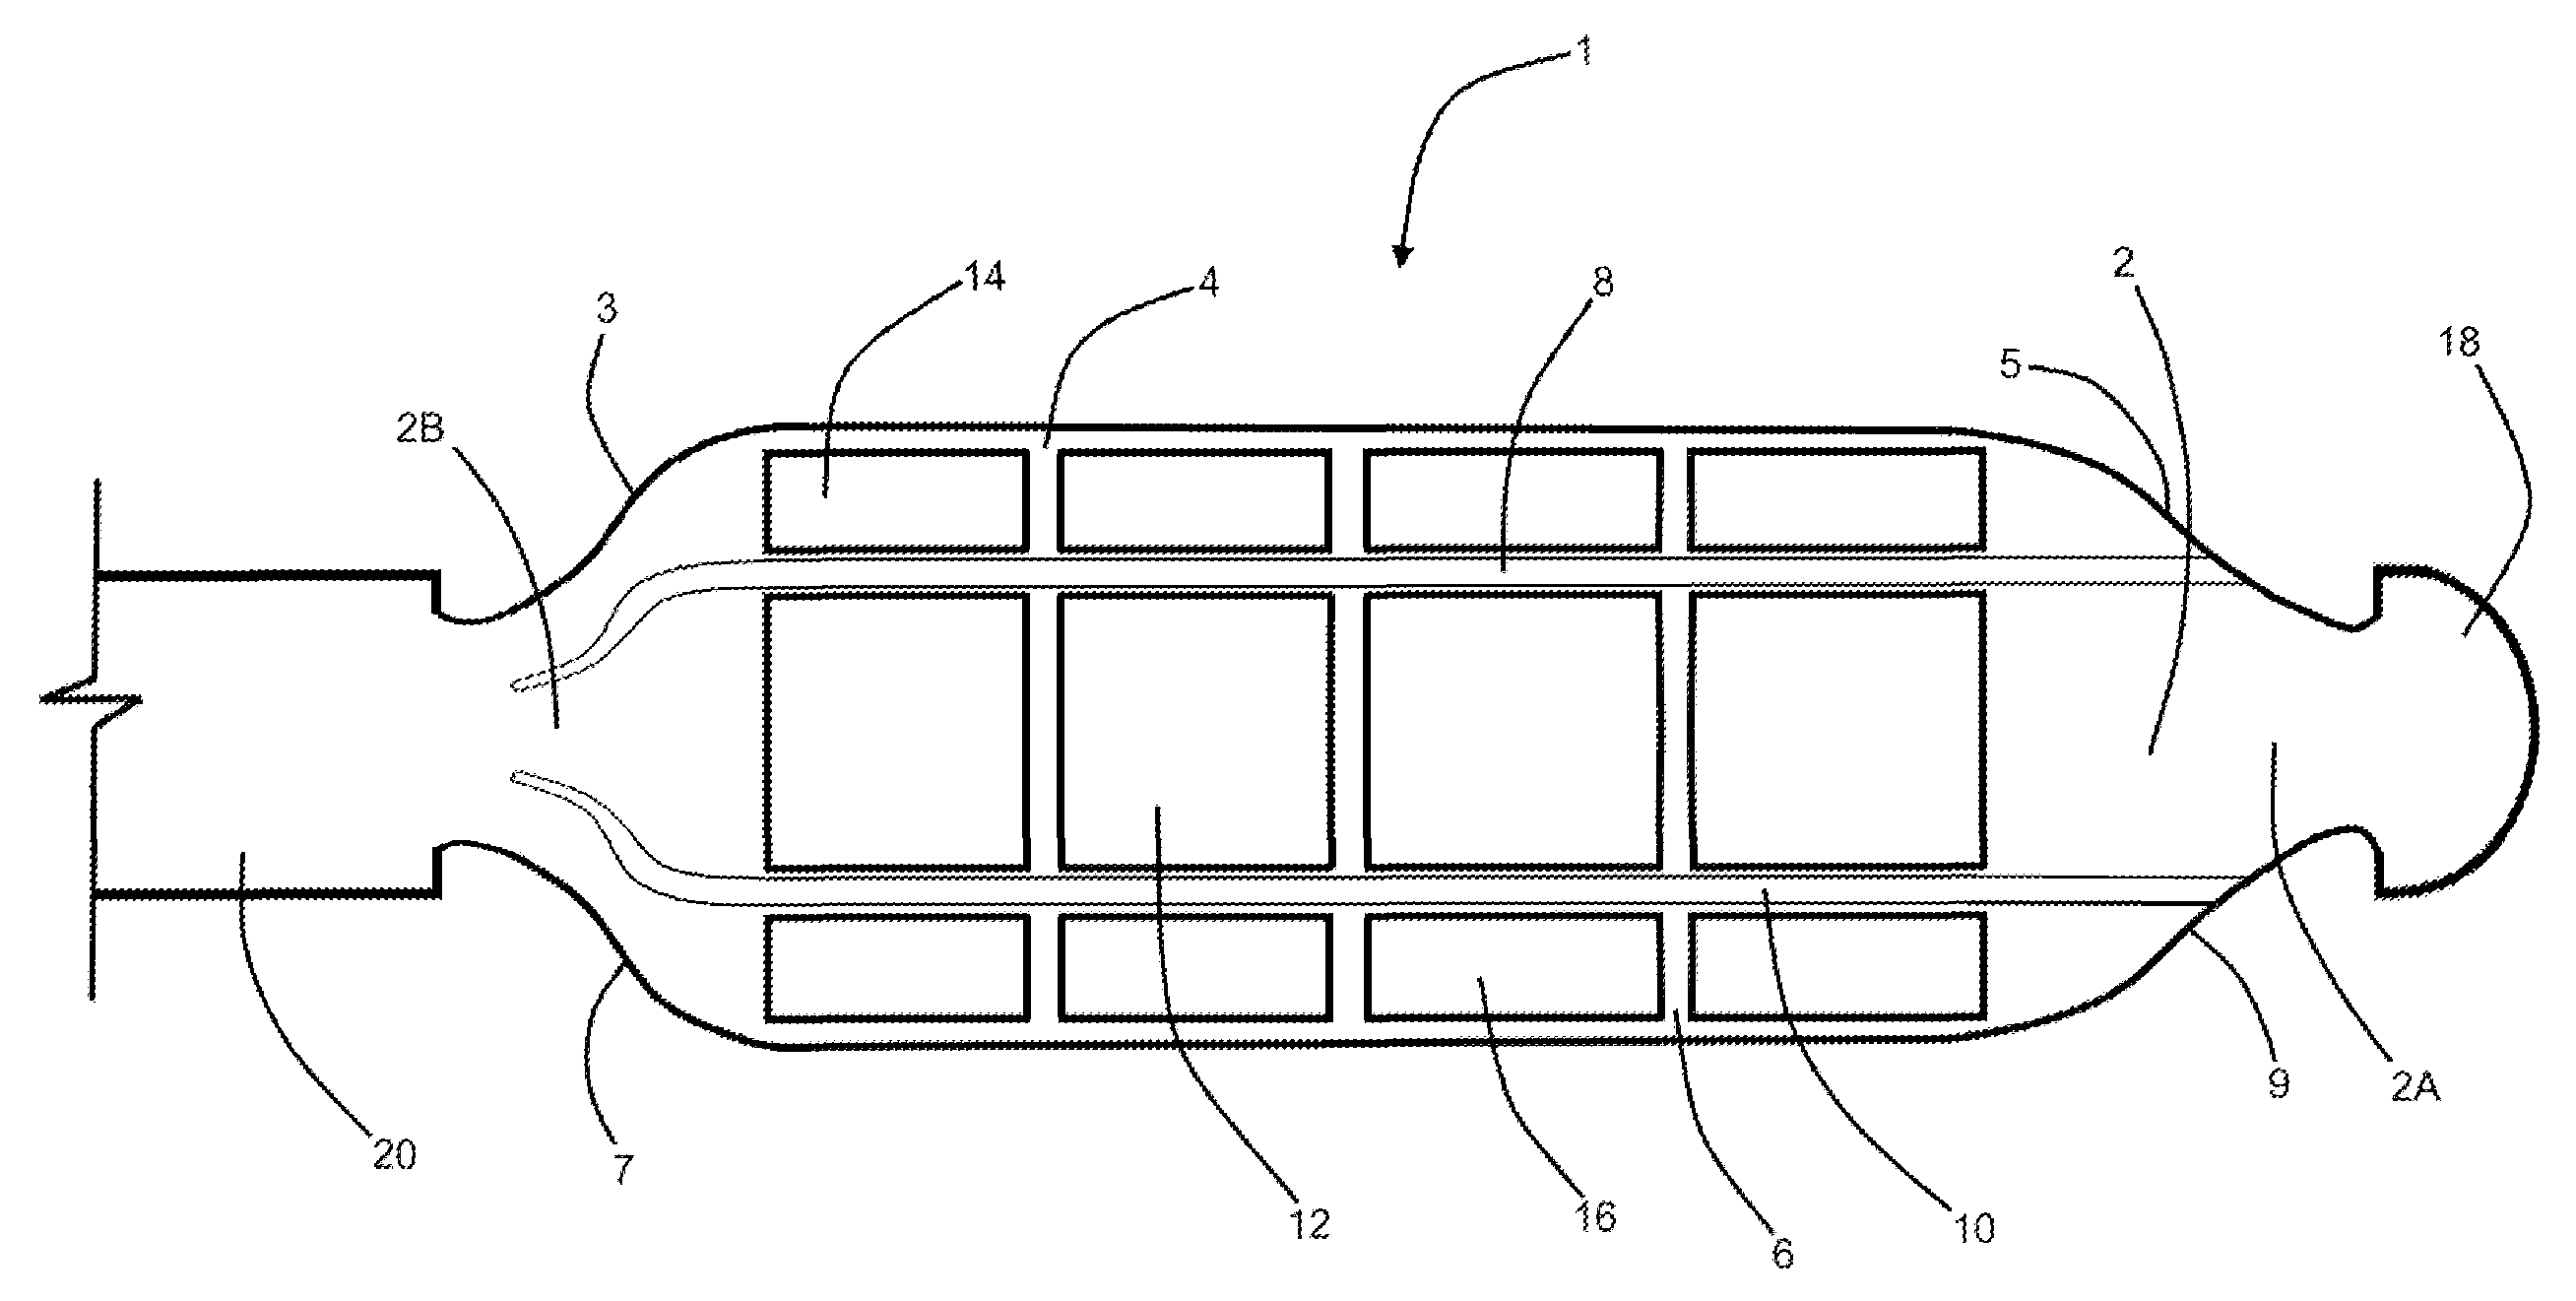 Assembly for pain suppressing electrical stimulation of a patient's nerve